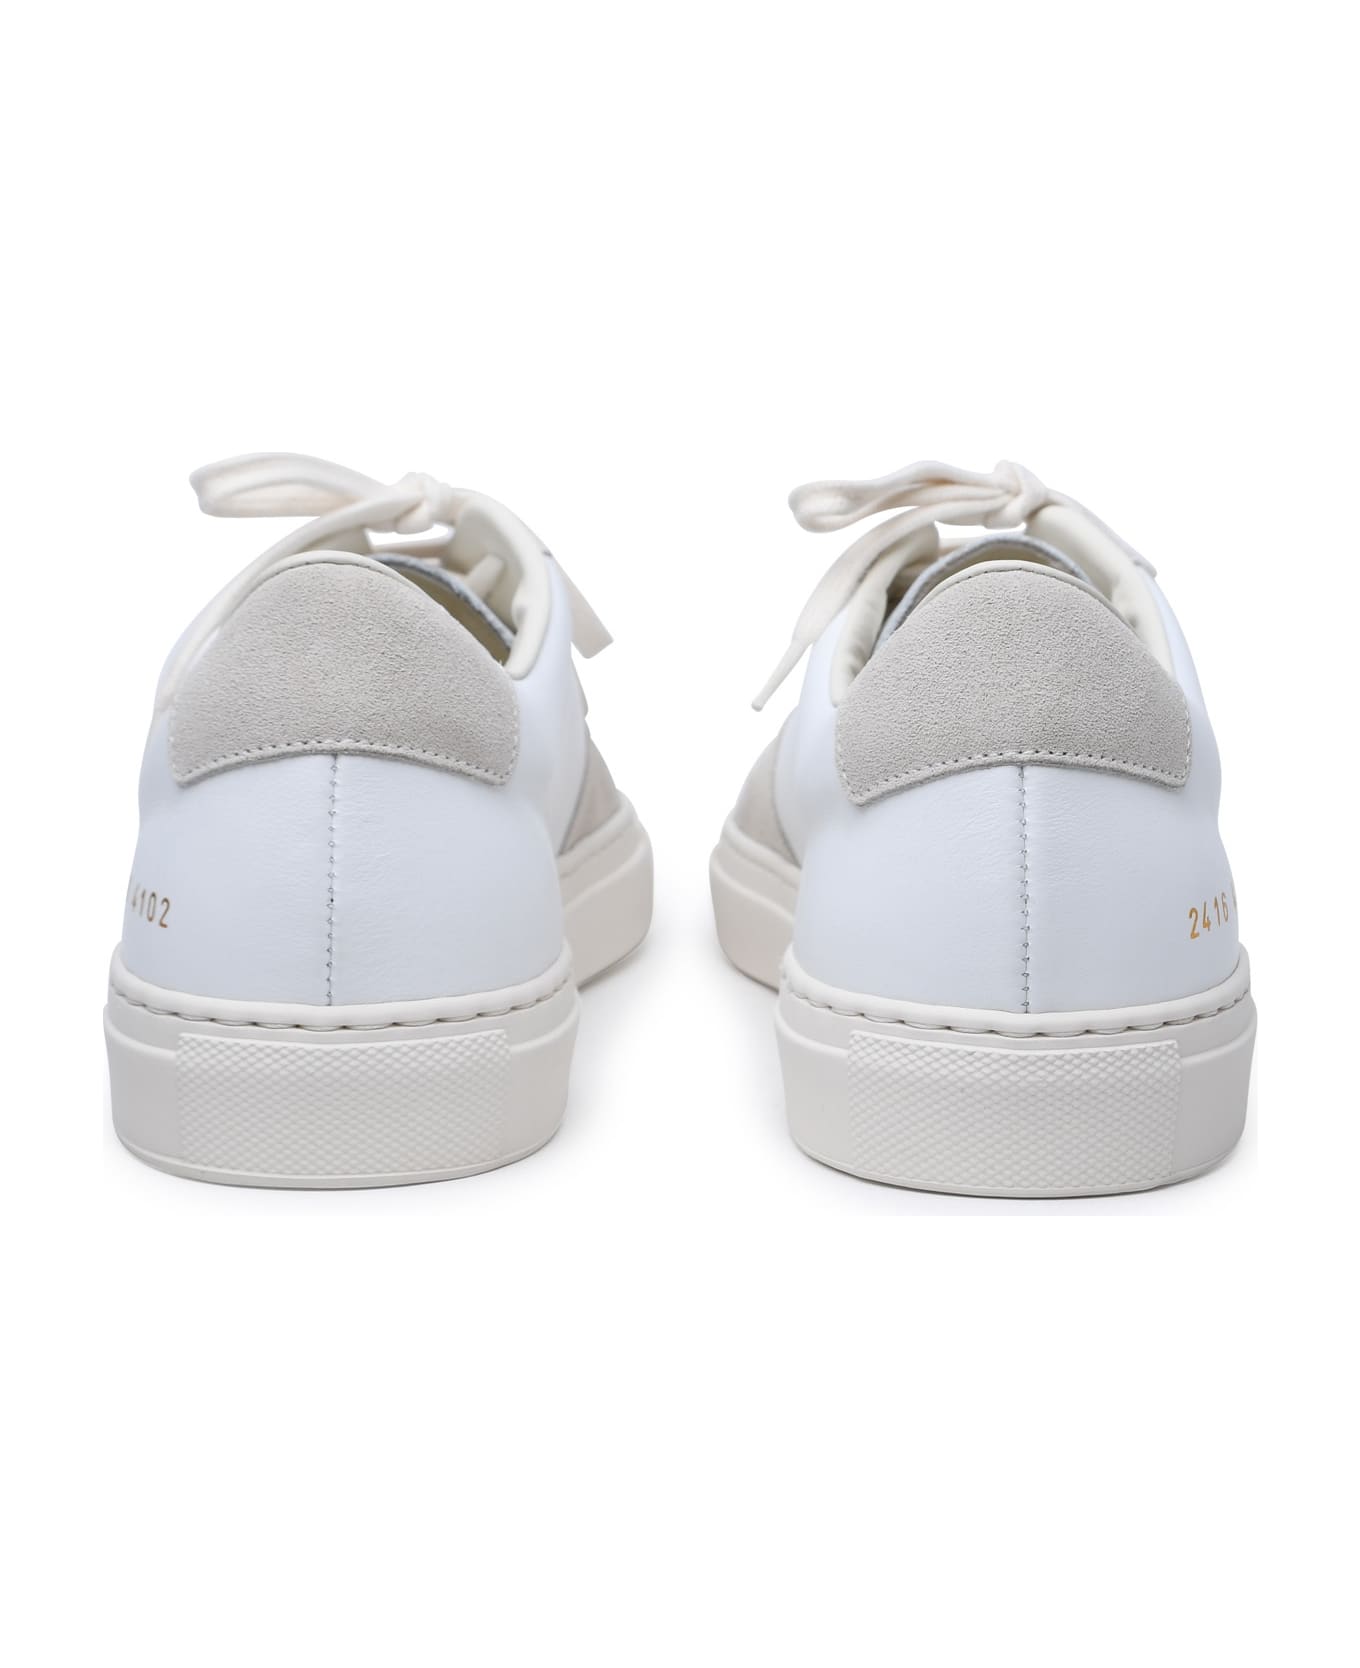 Common Projects 'bball Duo' White Leather Sneakers - White